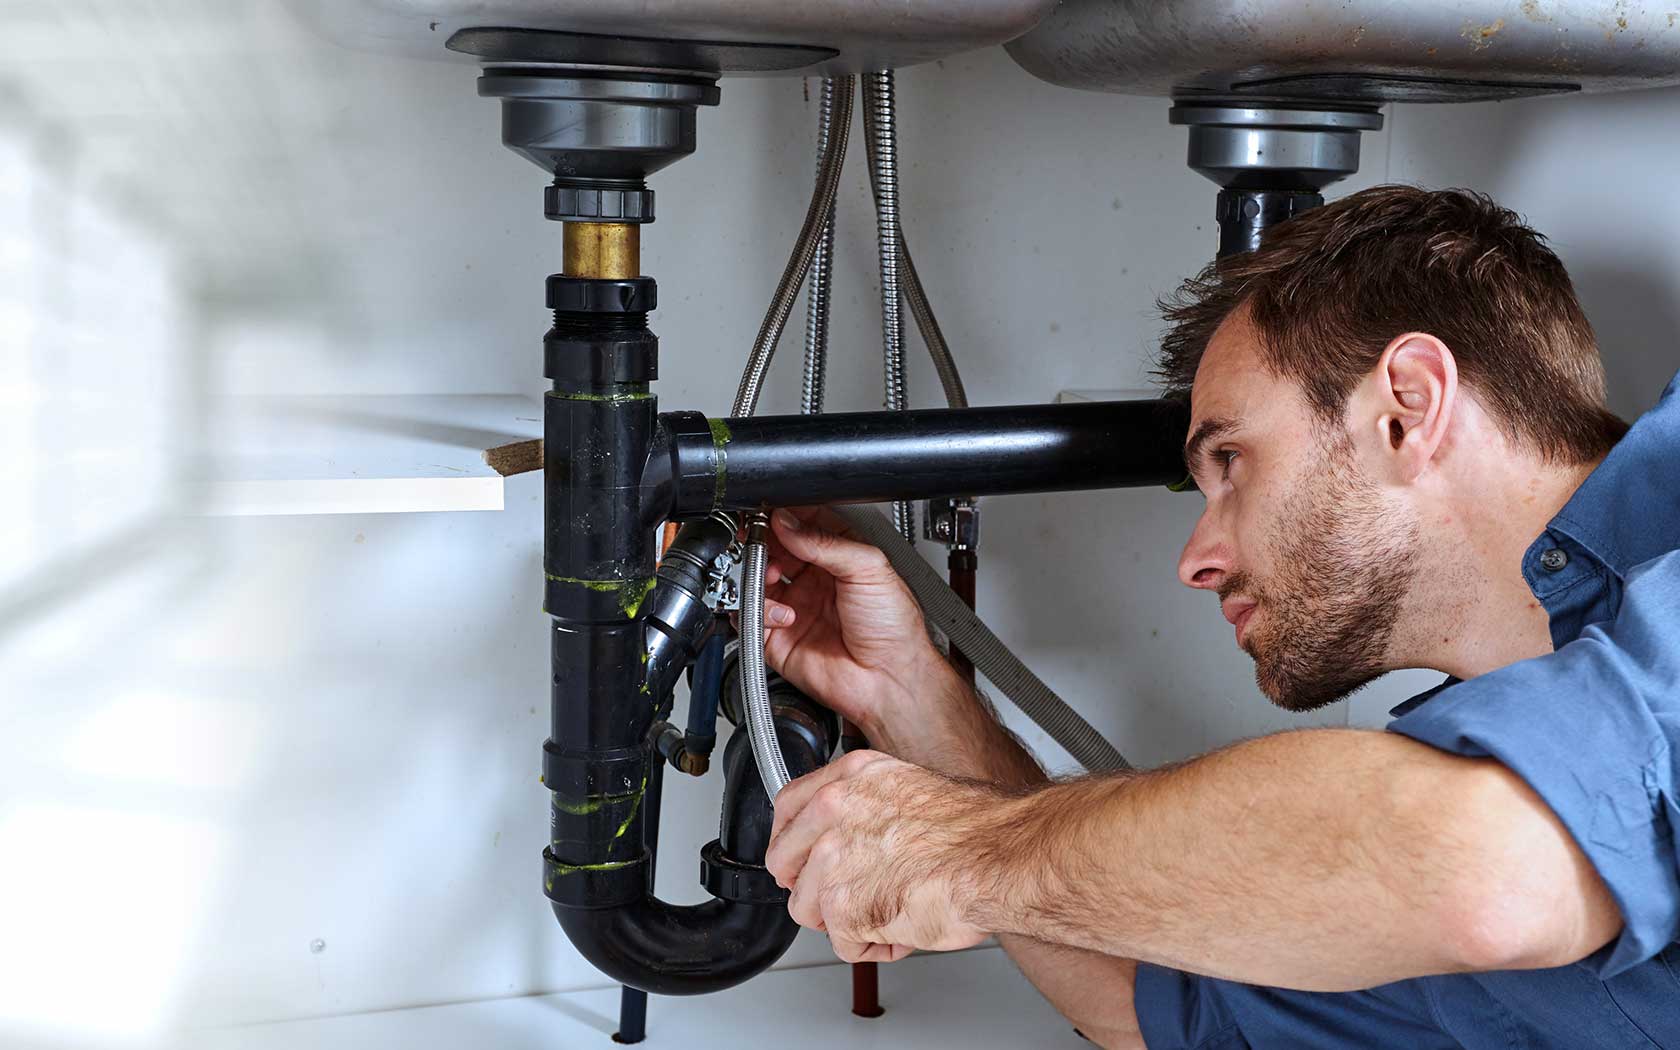 Professional Plumbing Service - What is it?